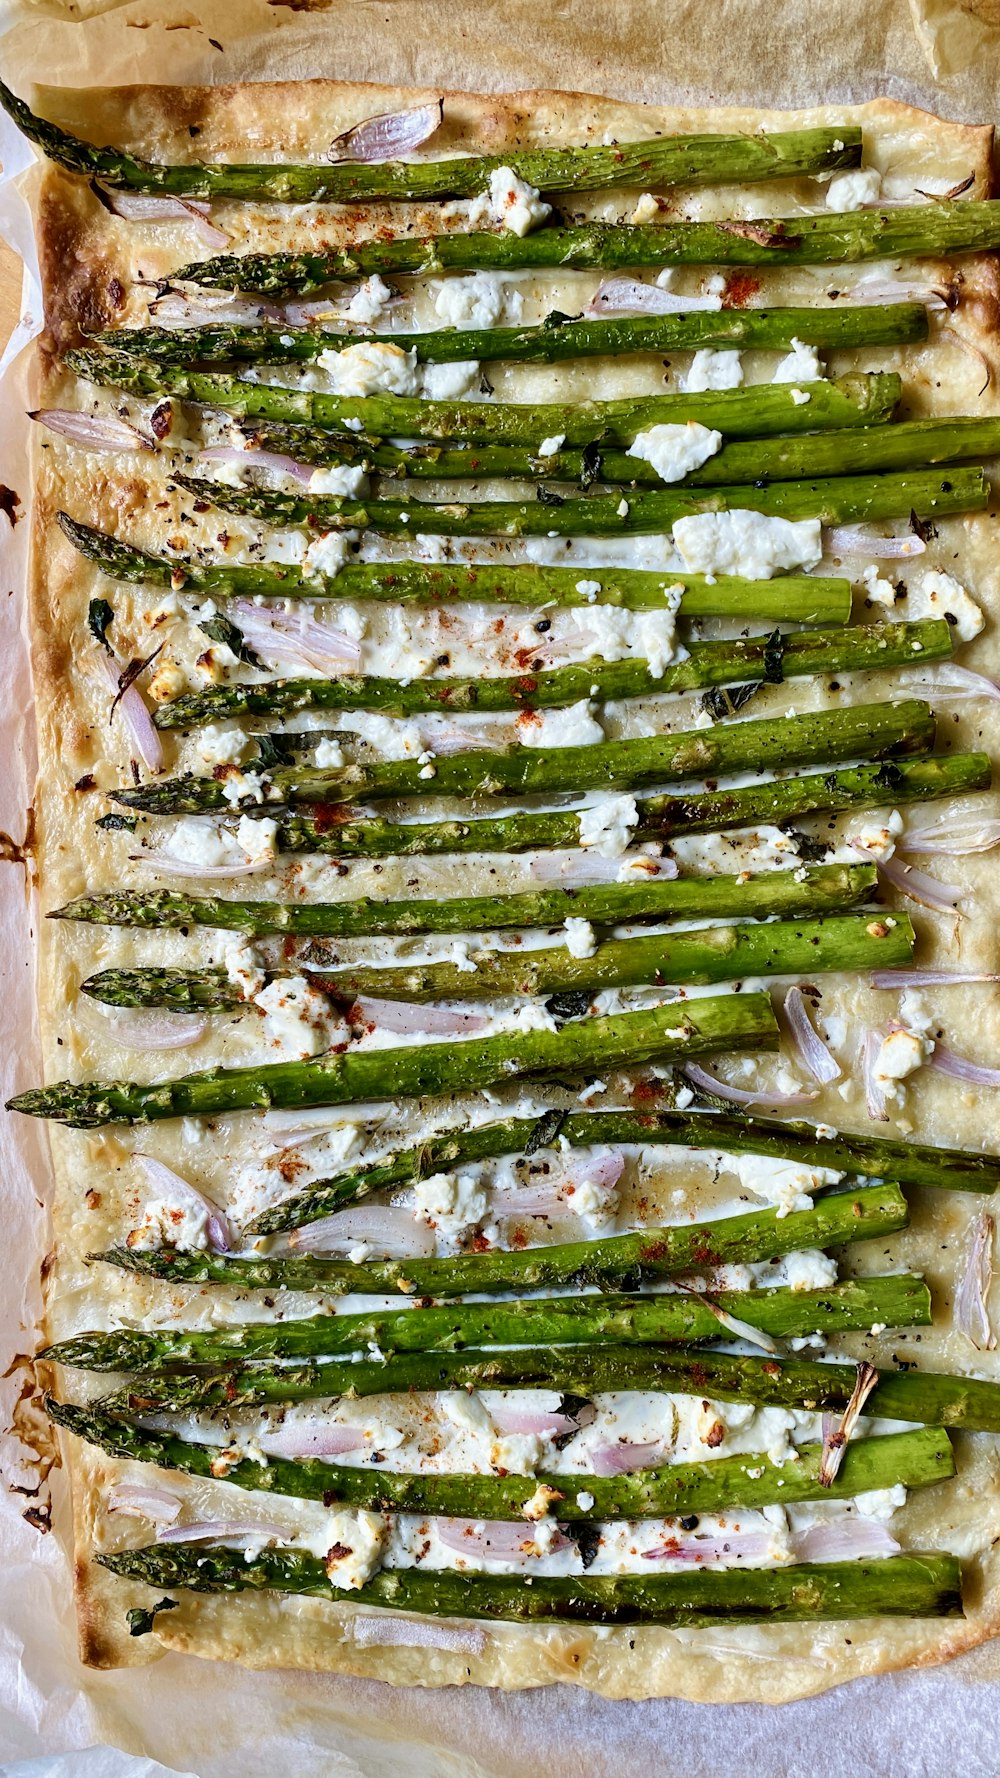 a pizza topped with asparagus and cheese